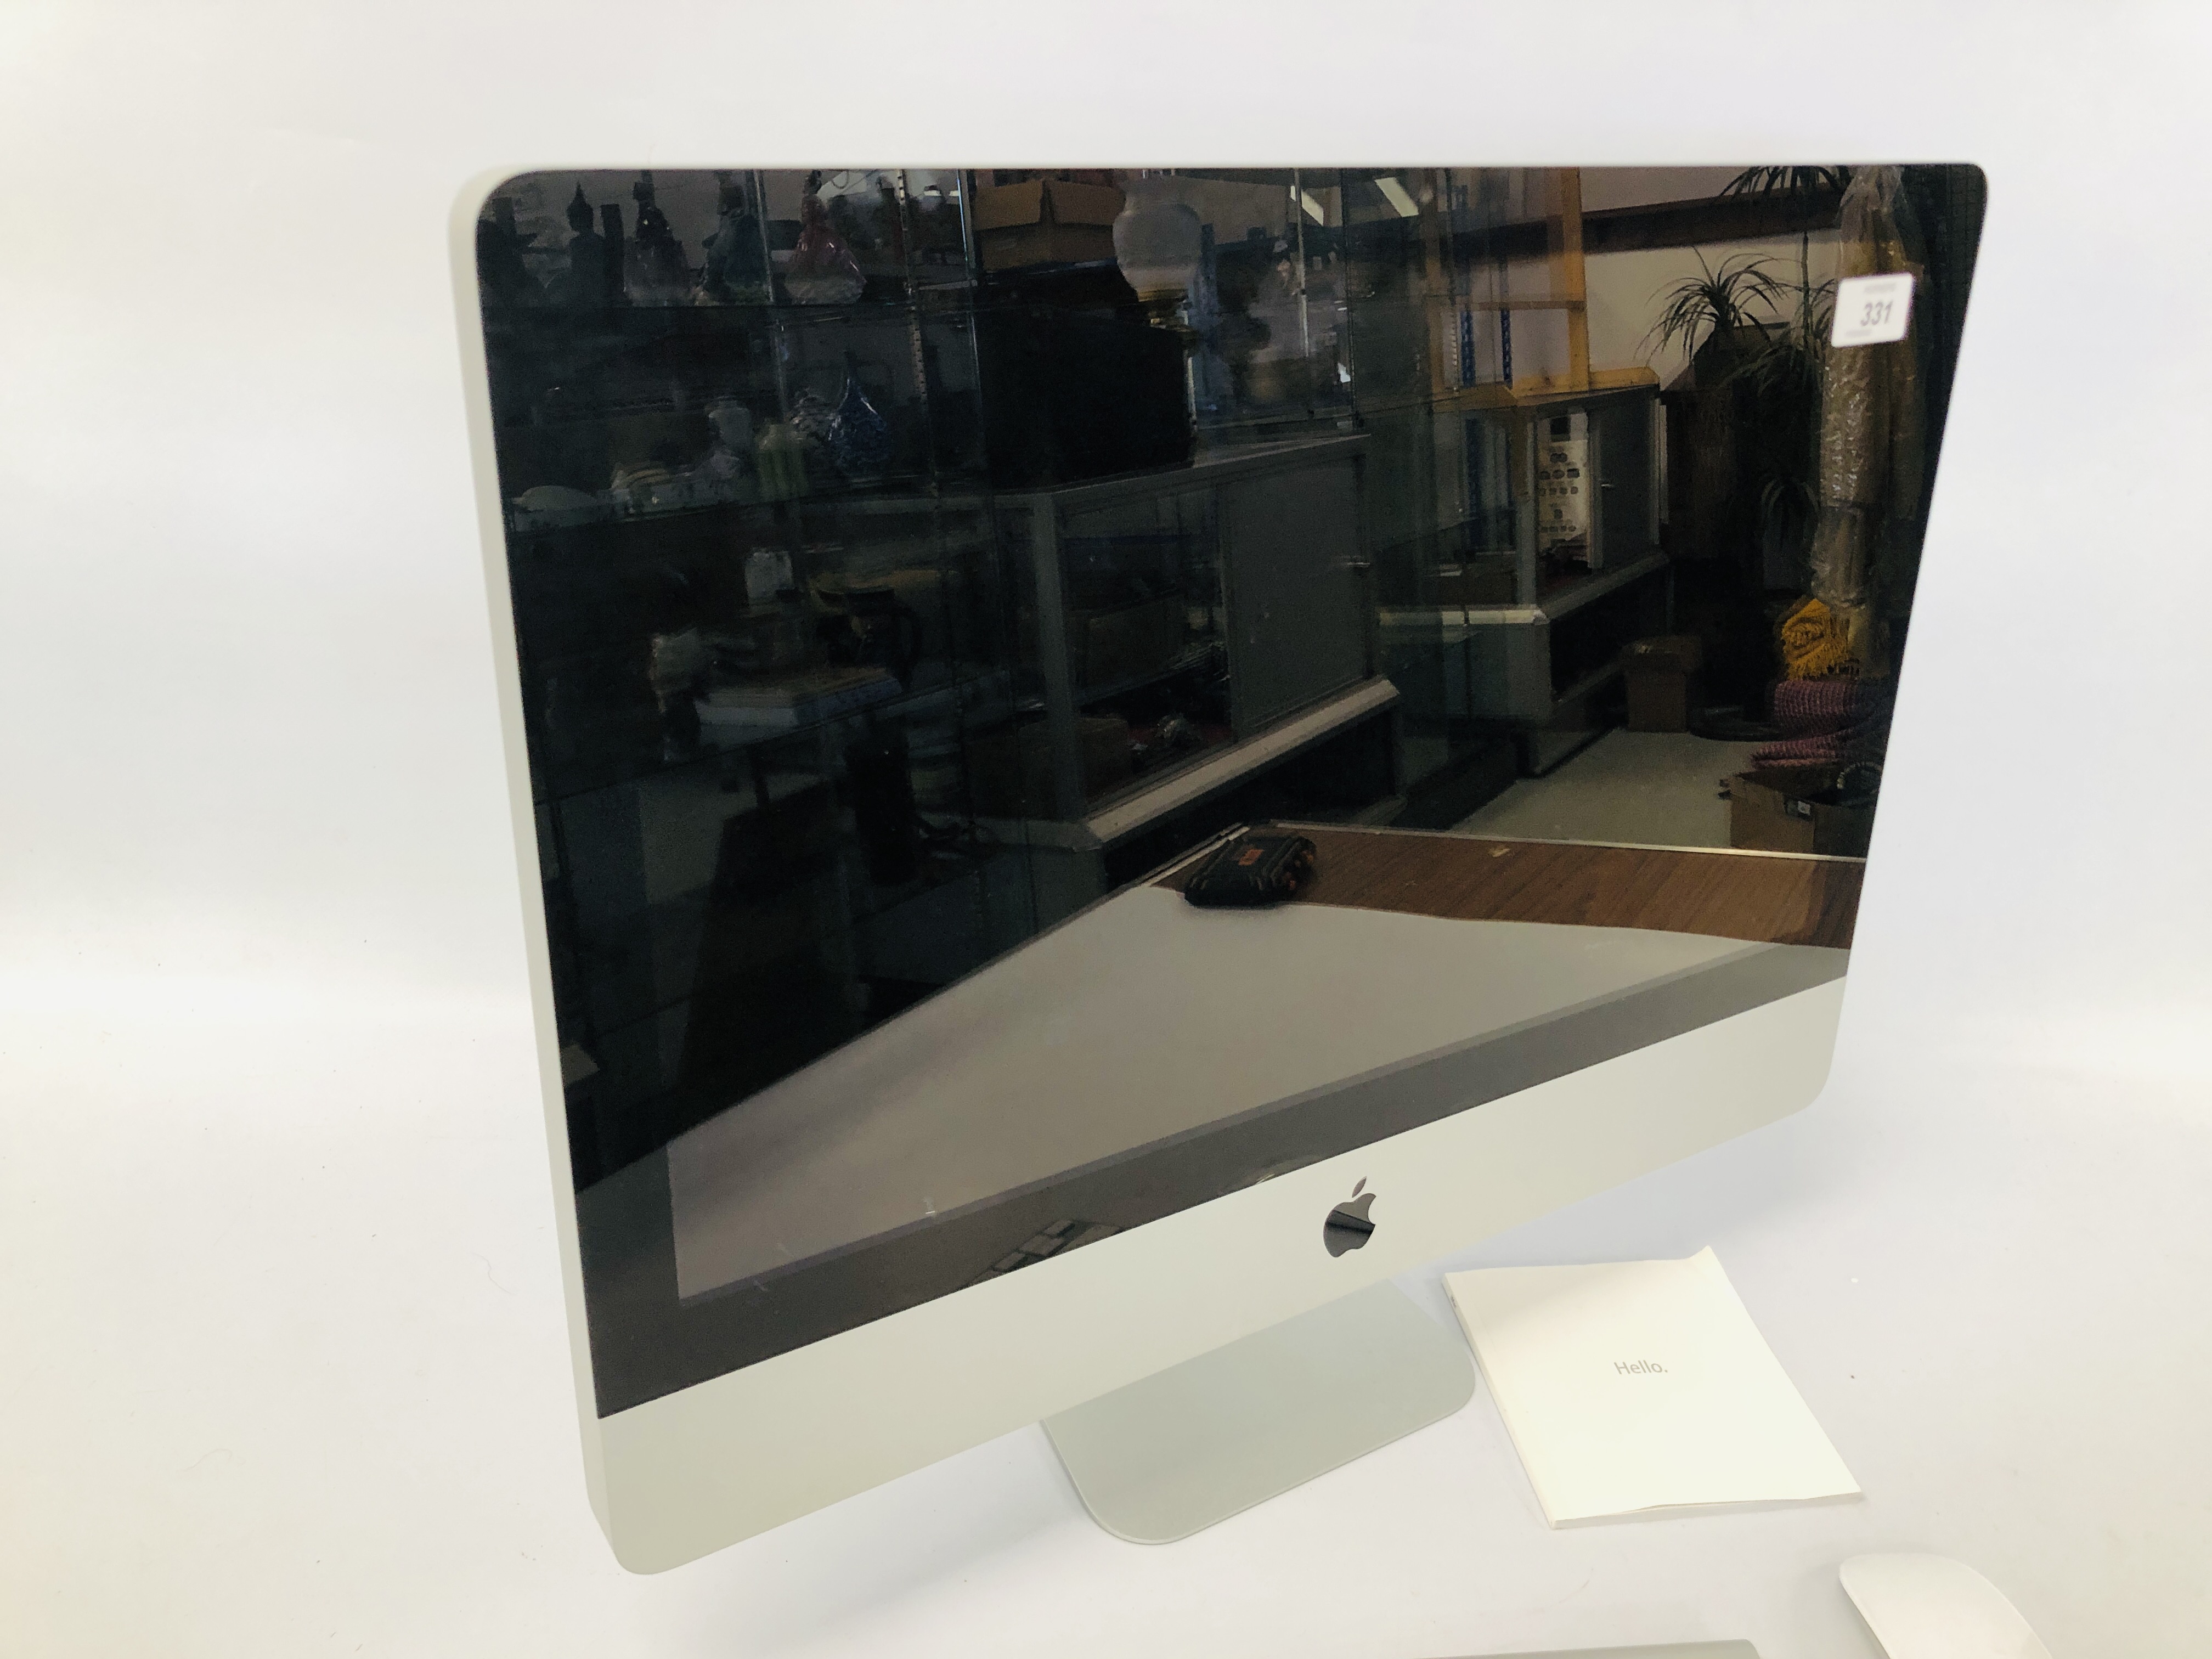 APPLE IMAC DESKTOP COMPUTER MODEL A1311 WITH KEYBOARD AND MOUSE - SOLD AS SEEN - Image 4 of 6